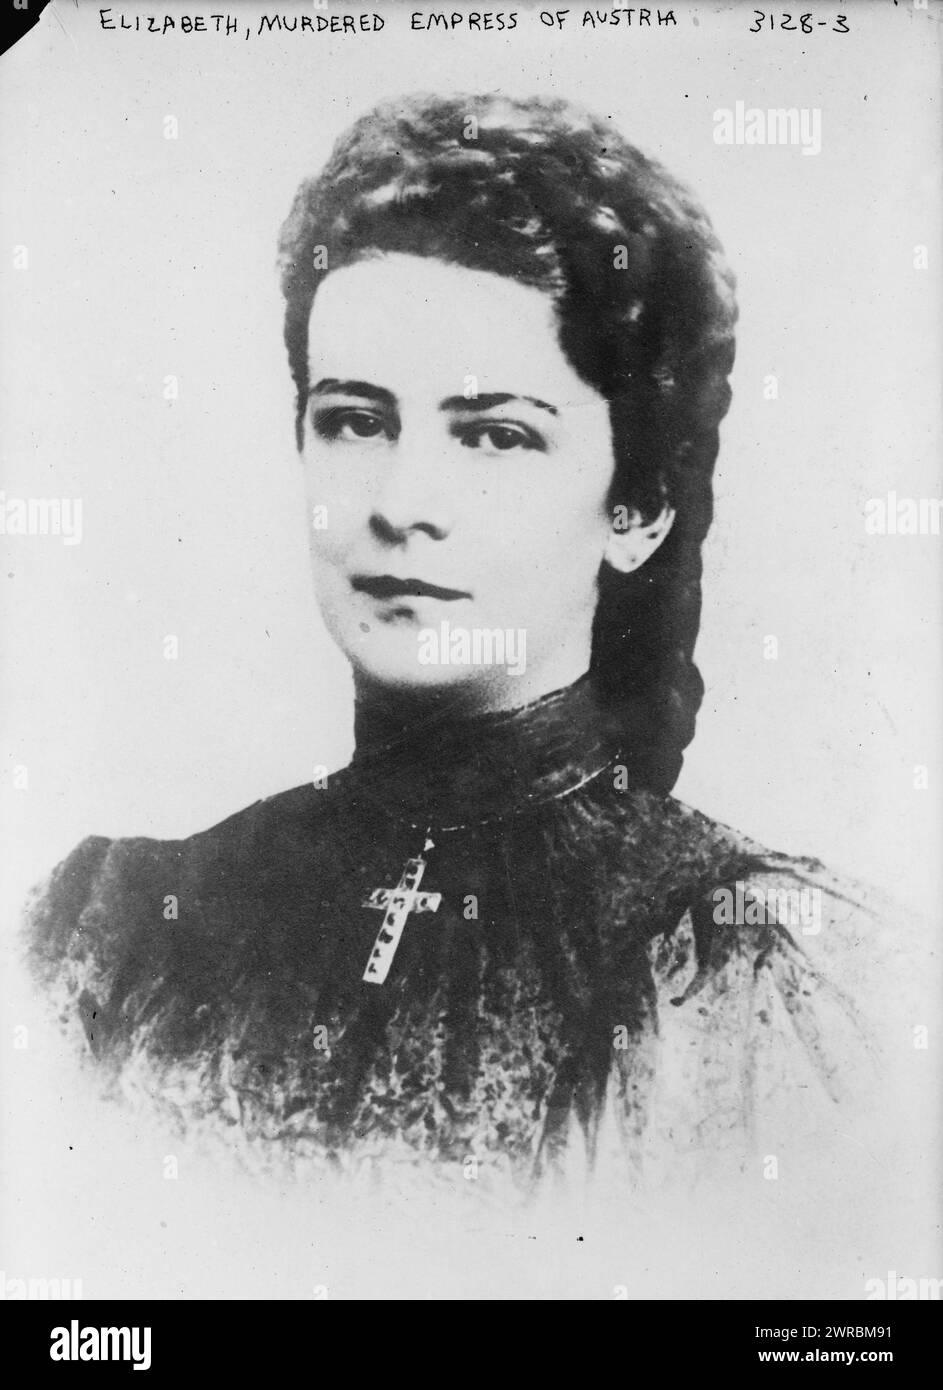 Elizabeth, Murdered Empress of Austria, Photograph shows Elisabeth of Austria (1837-1898) who was Empress of Austria and Queen consort of Hungary as the wife of Franz Joseph I., between ca. 1910 and ca. 1915, Glass negatives, 1 negative: glass Stock Photo